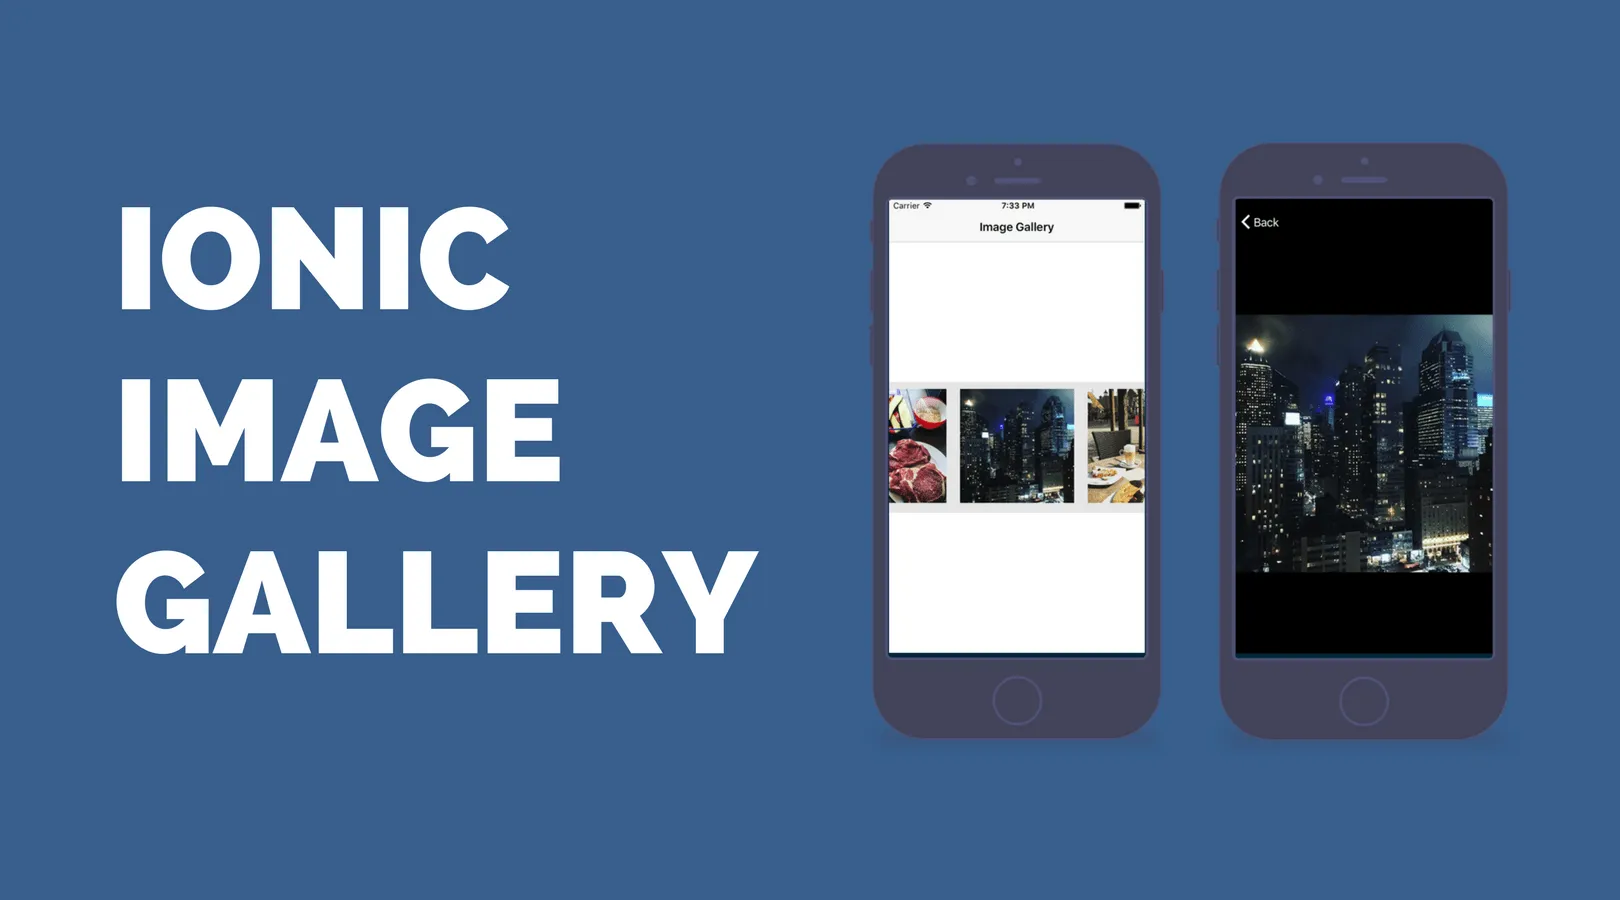 Building an Ionic Image Gallery With Zoom